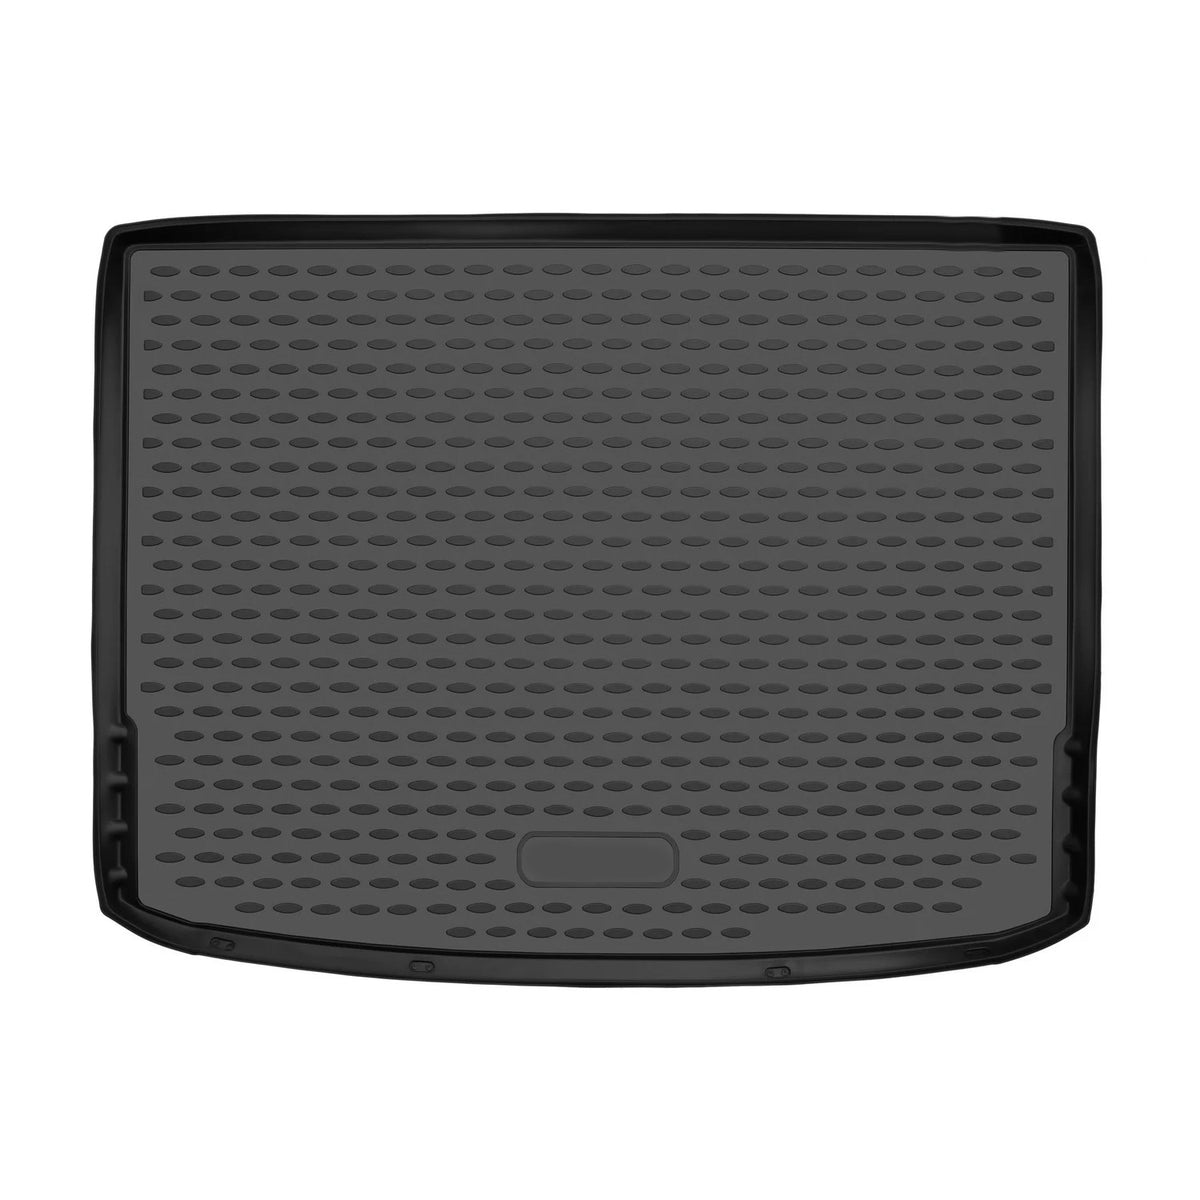 Boot mat boot liner for Audi A3 8Y Sportback 2020-2024 rubber TPE